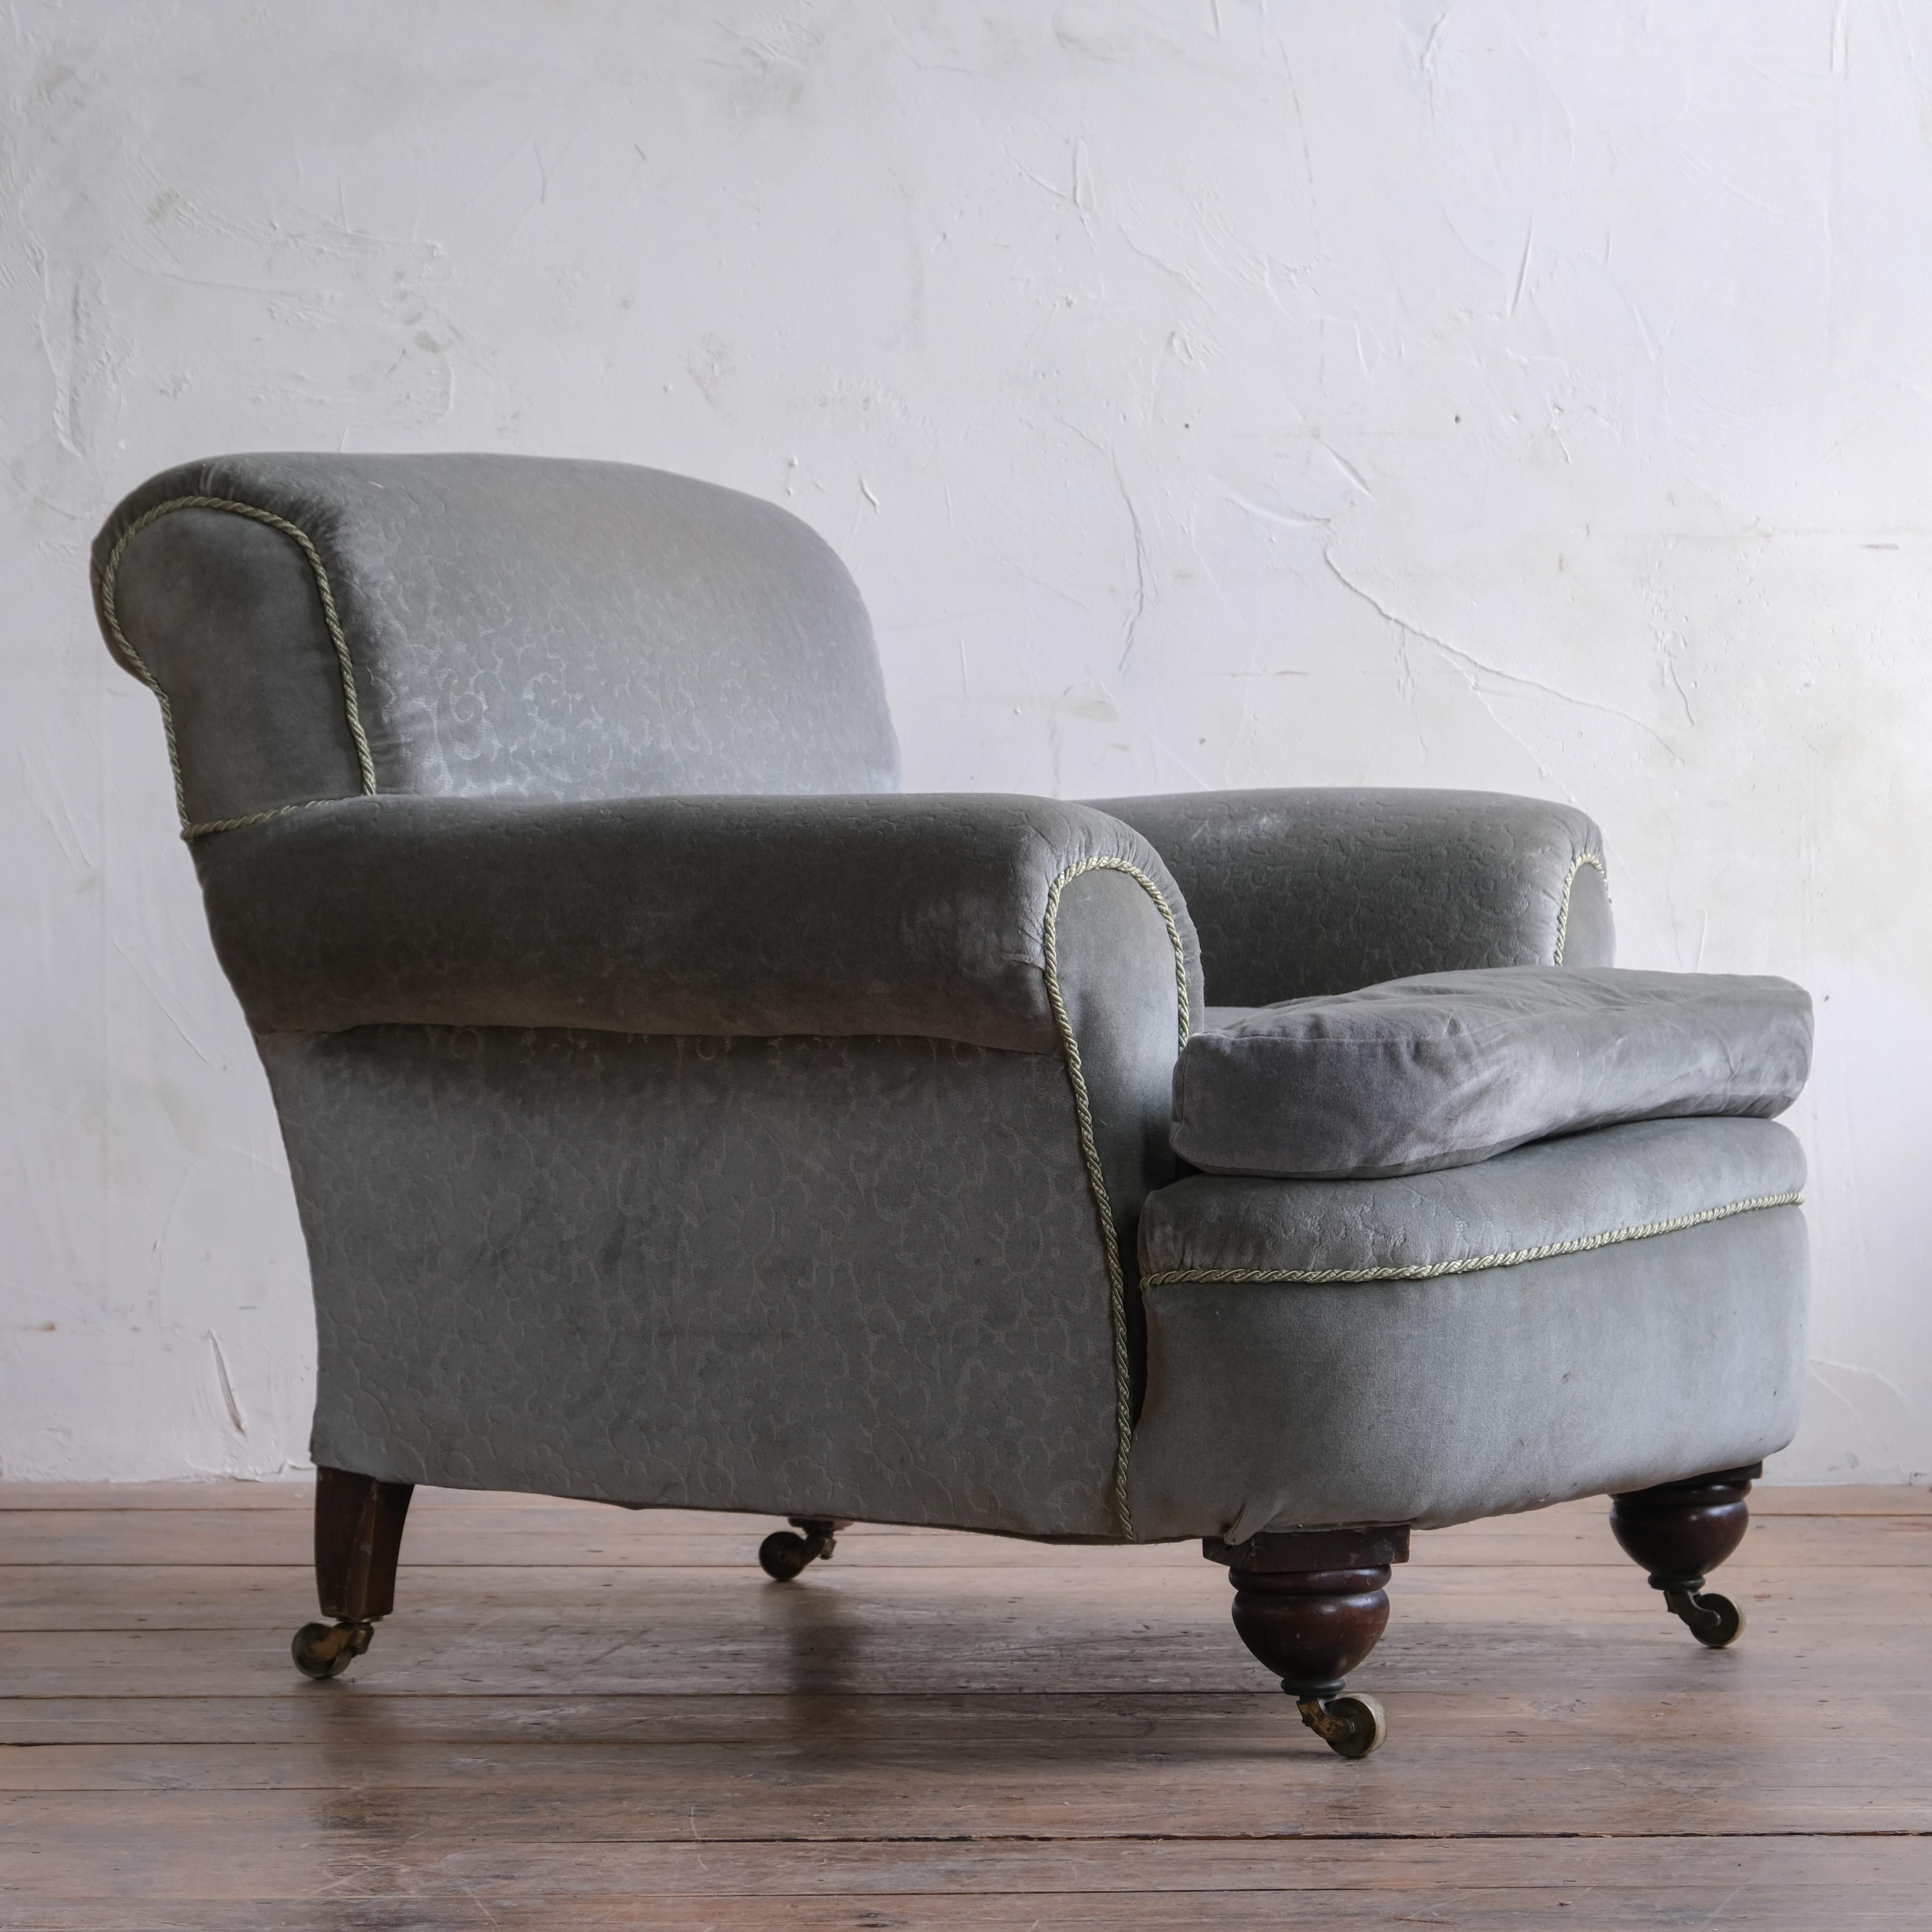 British 19th Century Howard Style Armchair For Sale